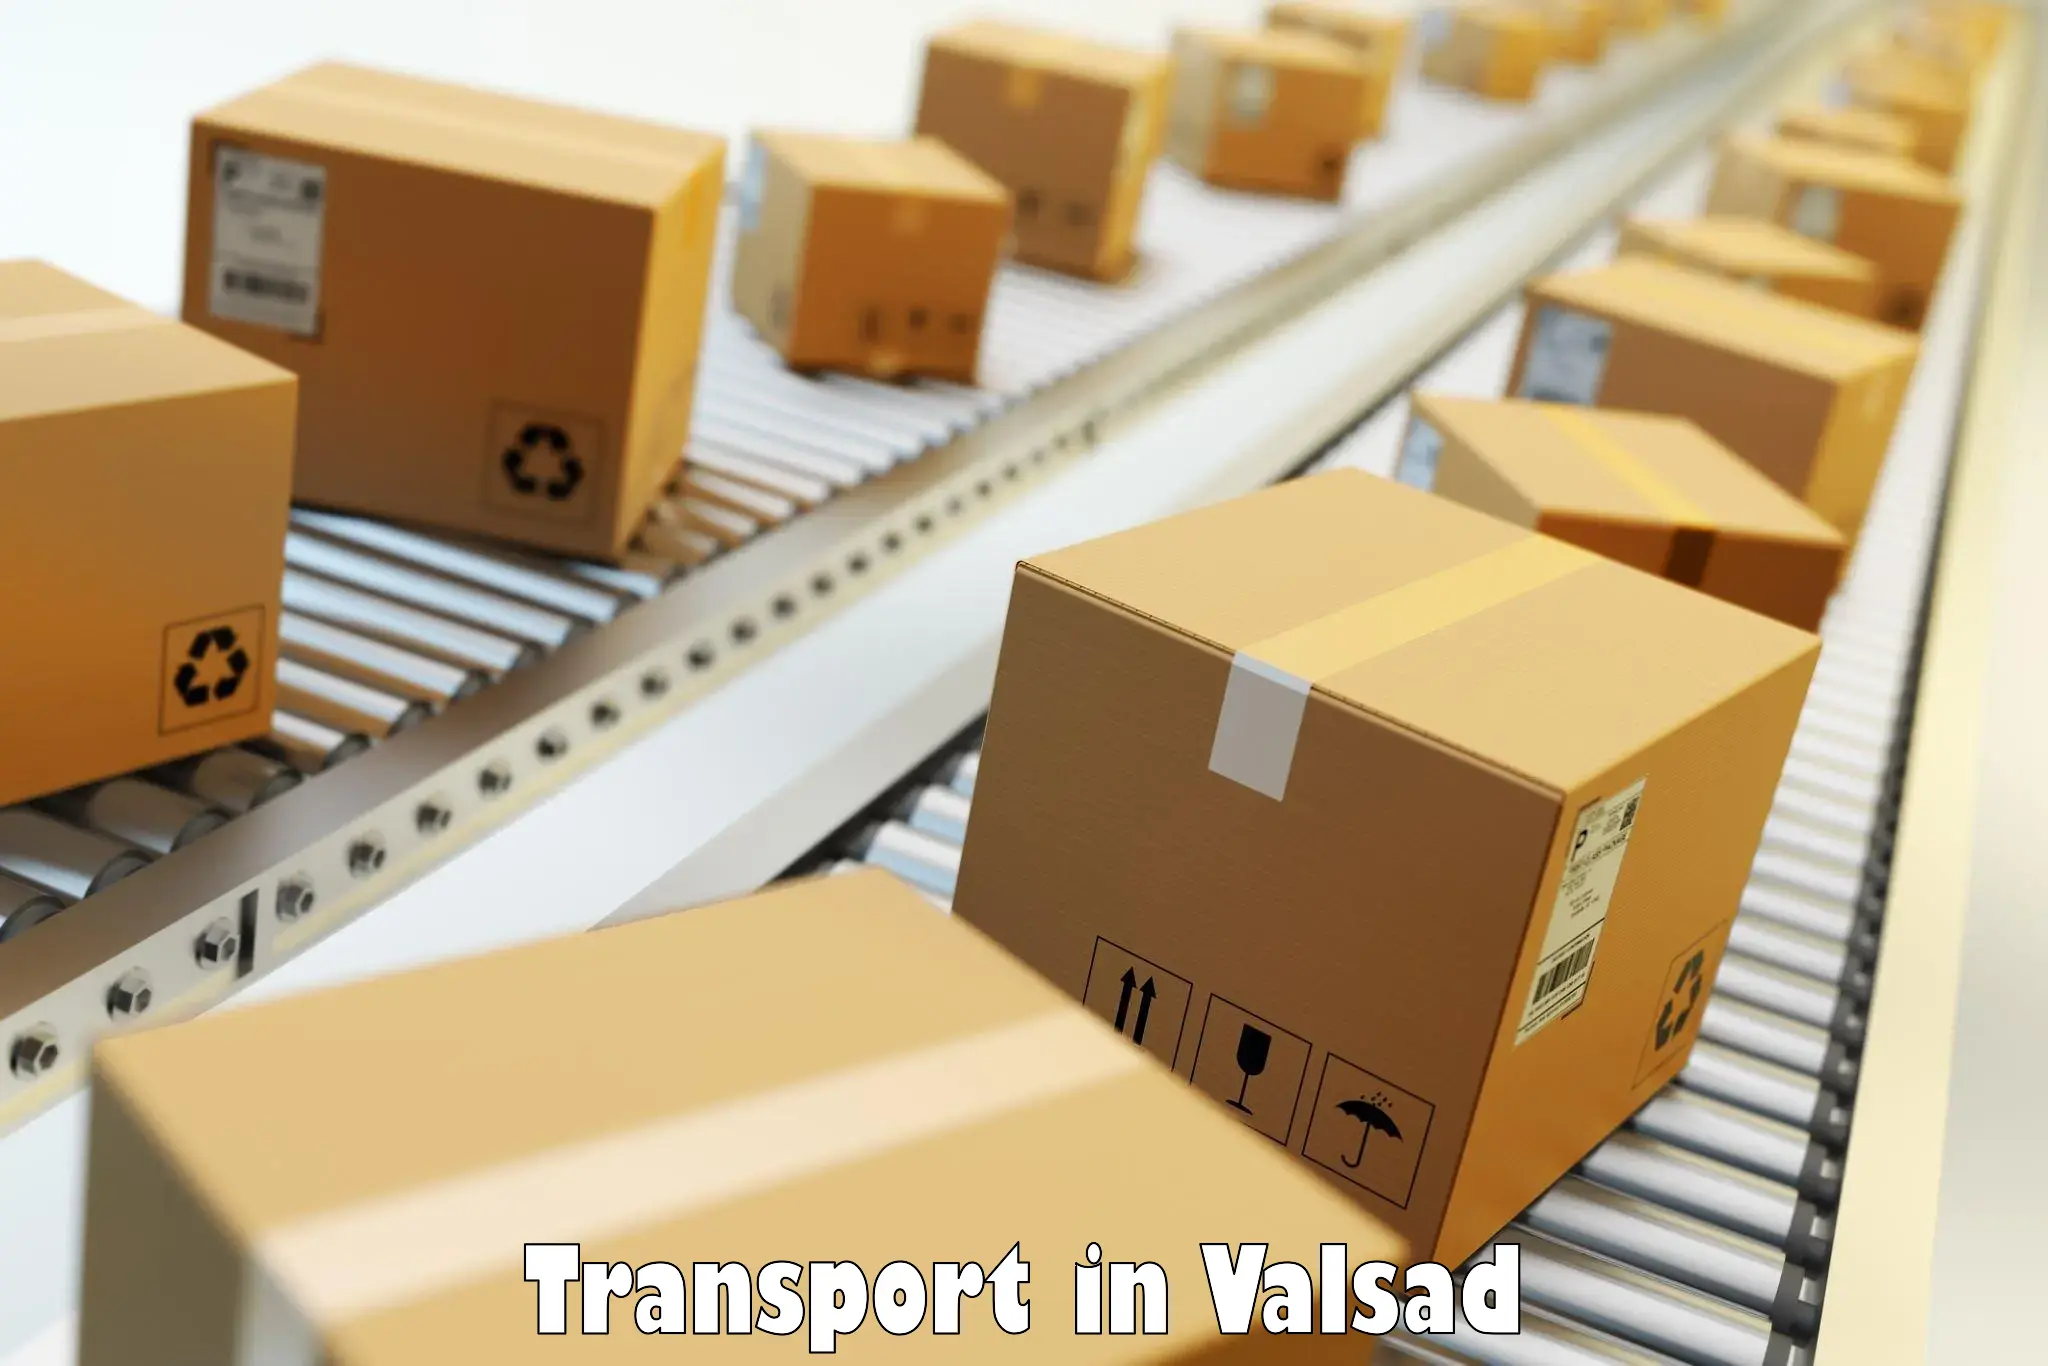 Container transport service in Valsad